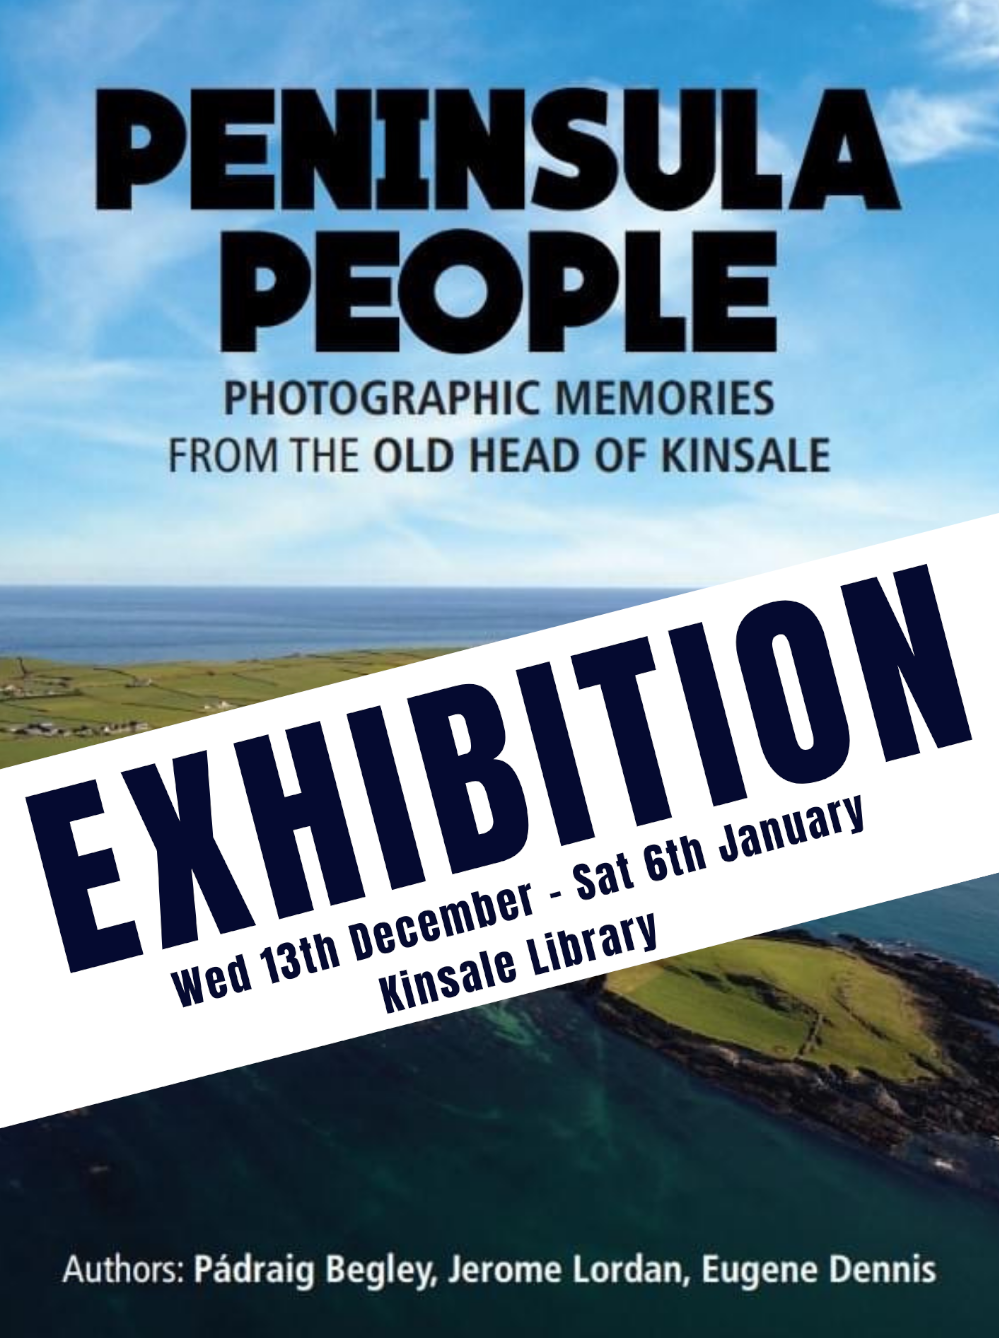 Peninsula People Exhibition at Kinsale Library